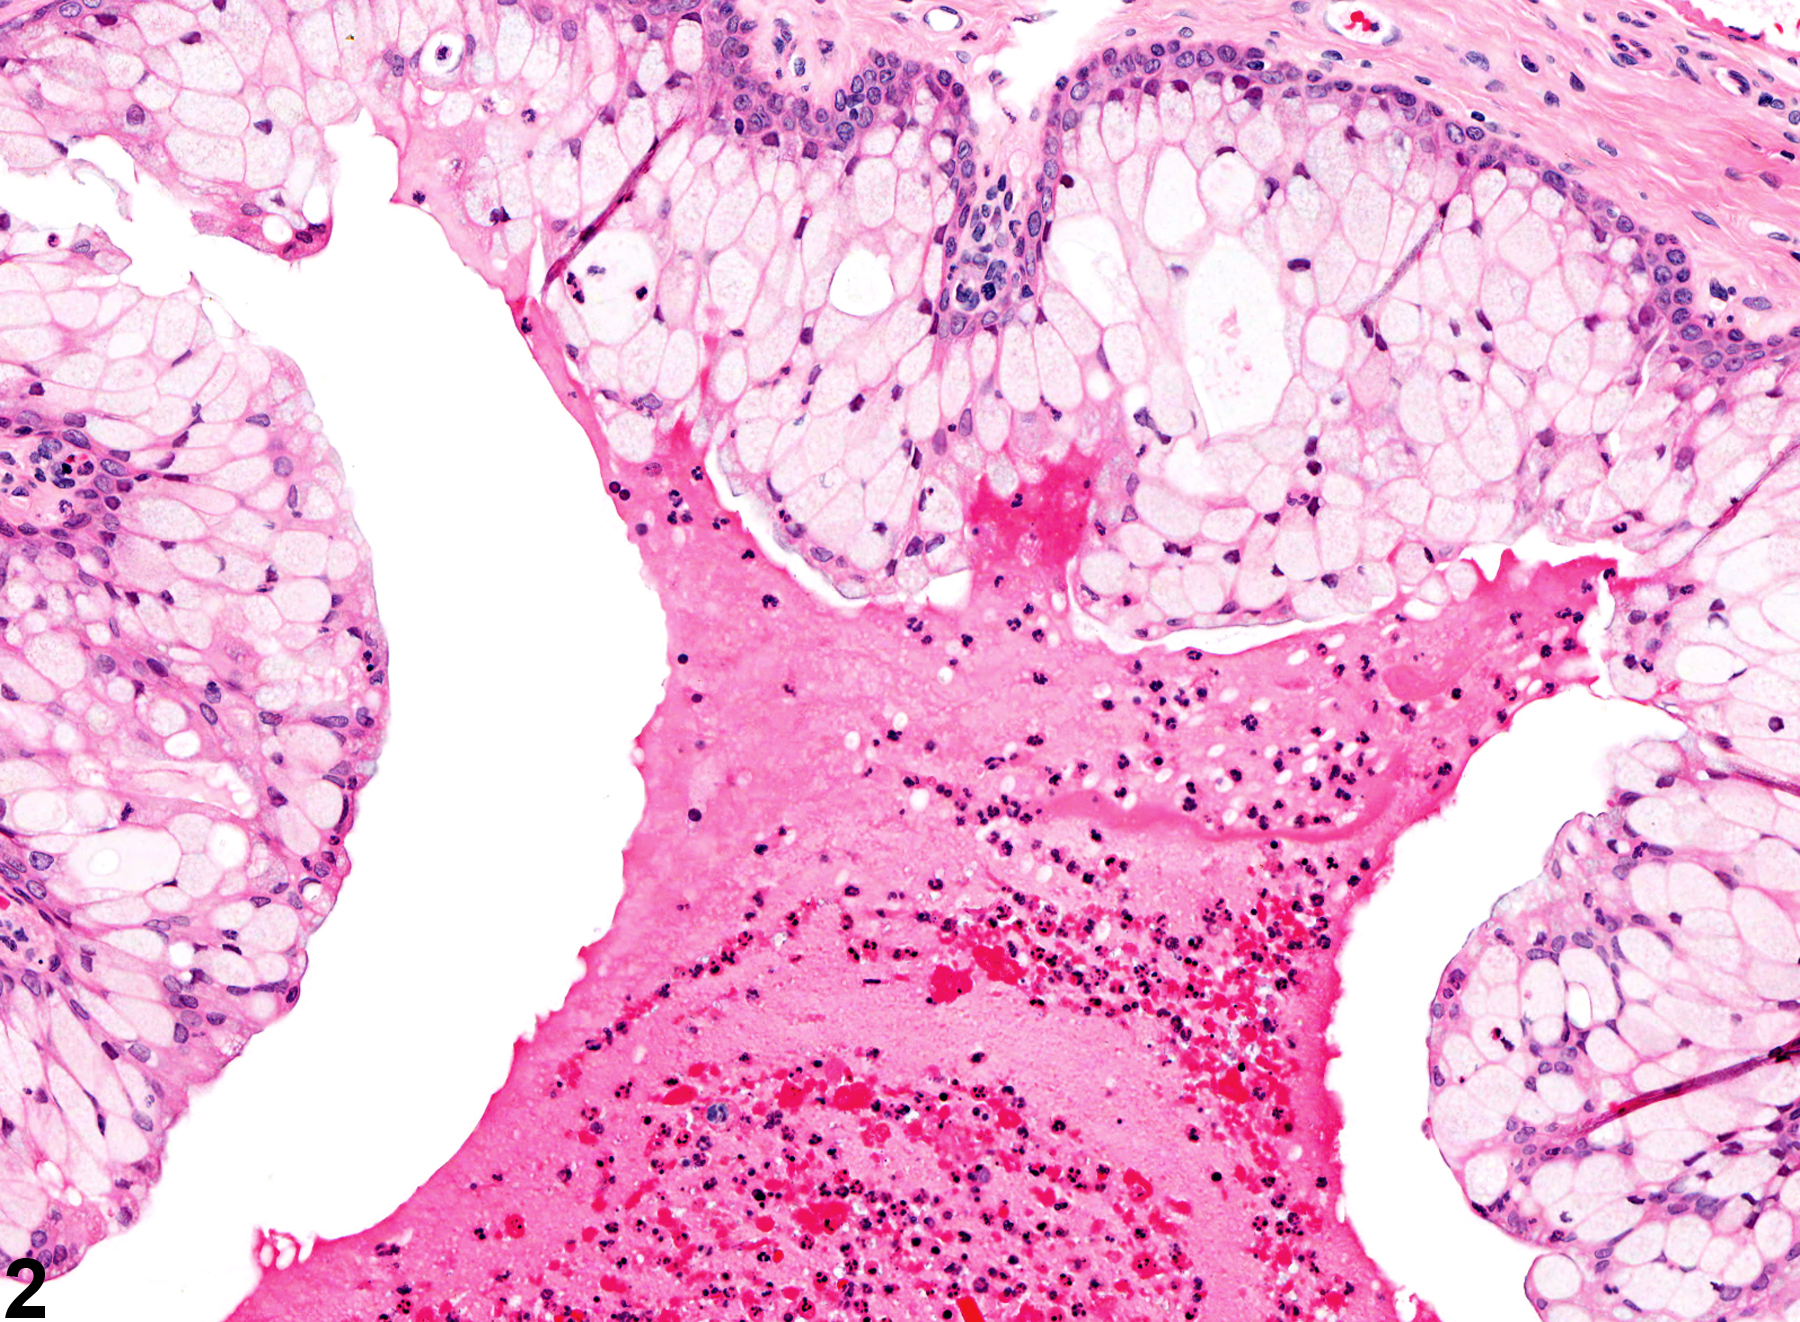 Image of inflammation, acute in the vagina from a female F344/N rat in a chronic study